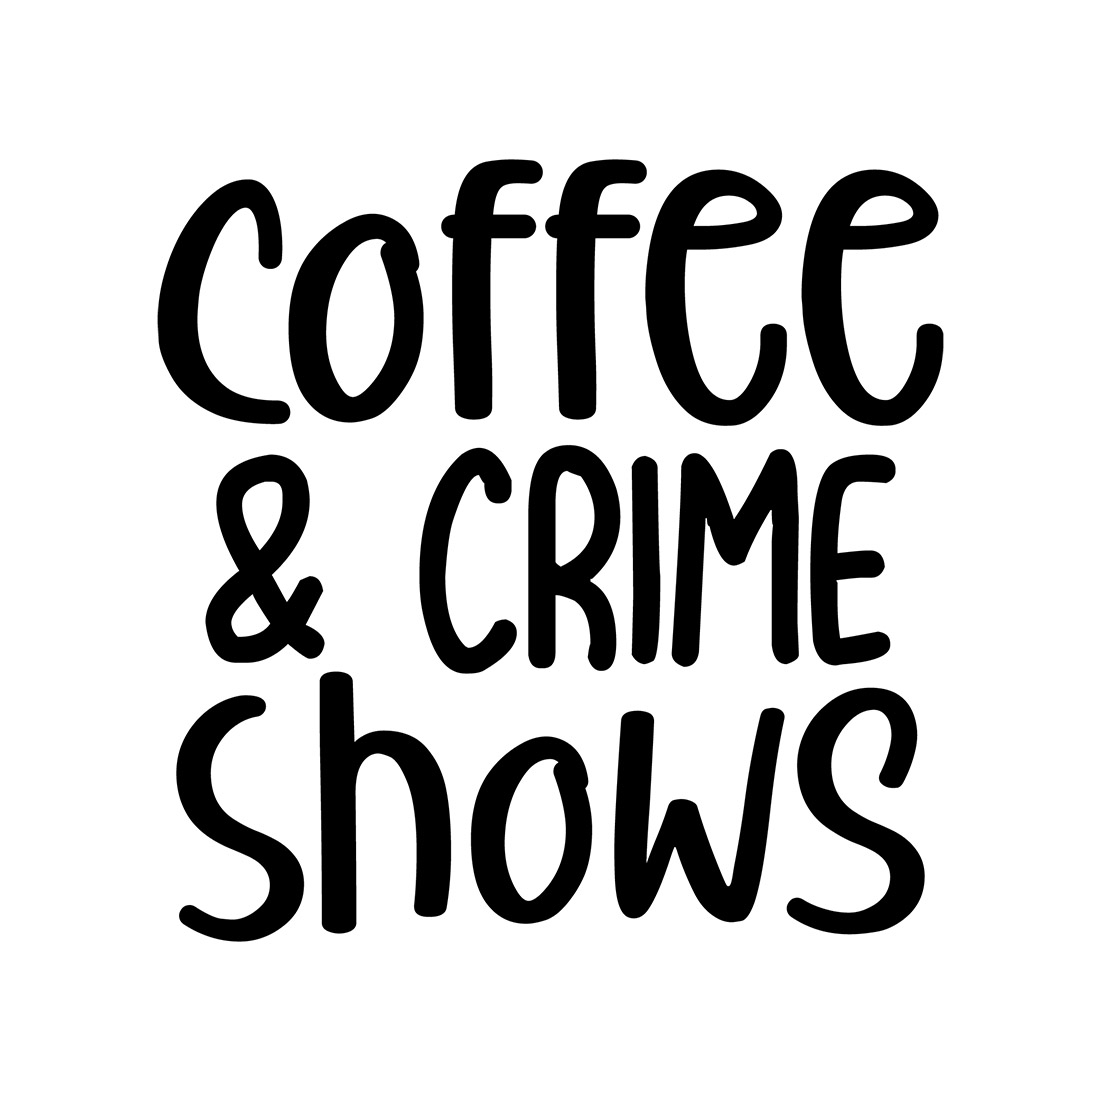 Image with a beautiful inscription for Coffee & Crime Shows prints.